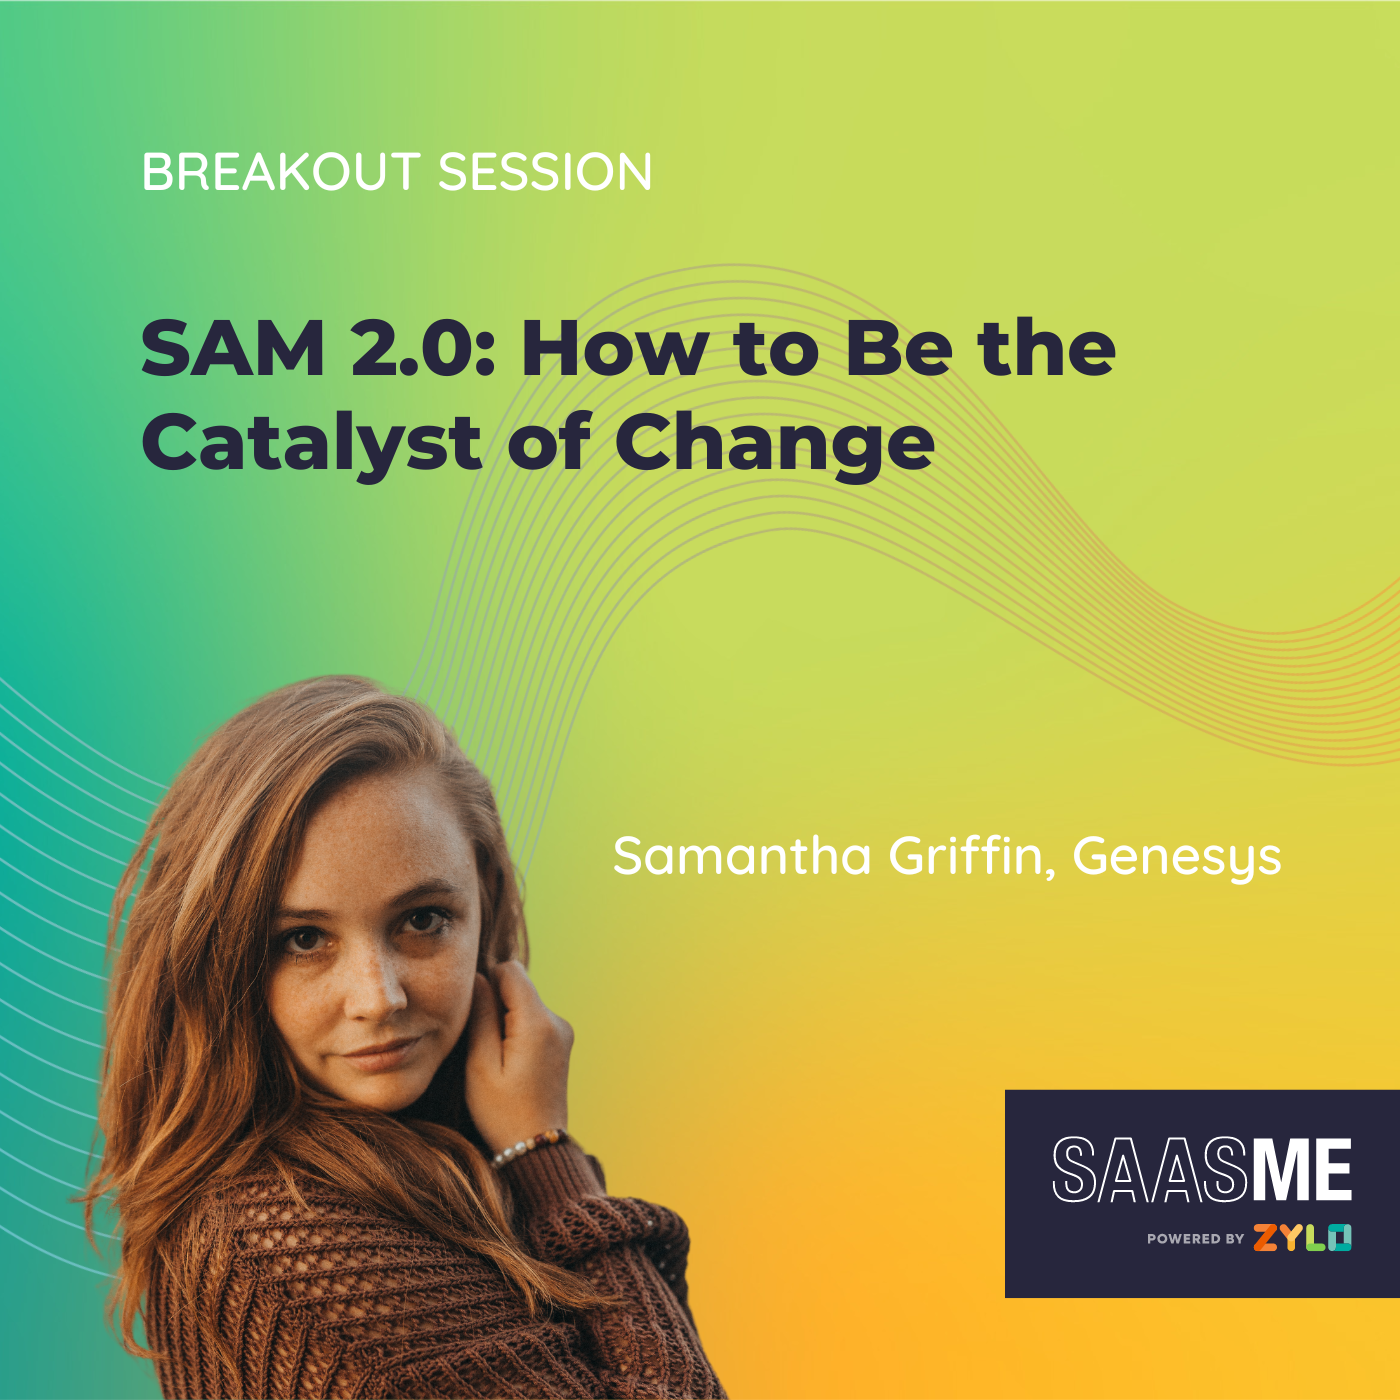 SAM 2.0: How to Be the Catalyst of Change